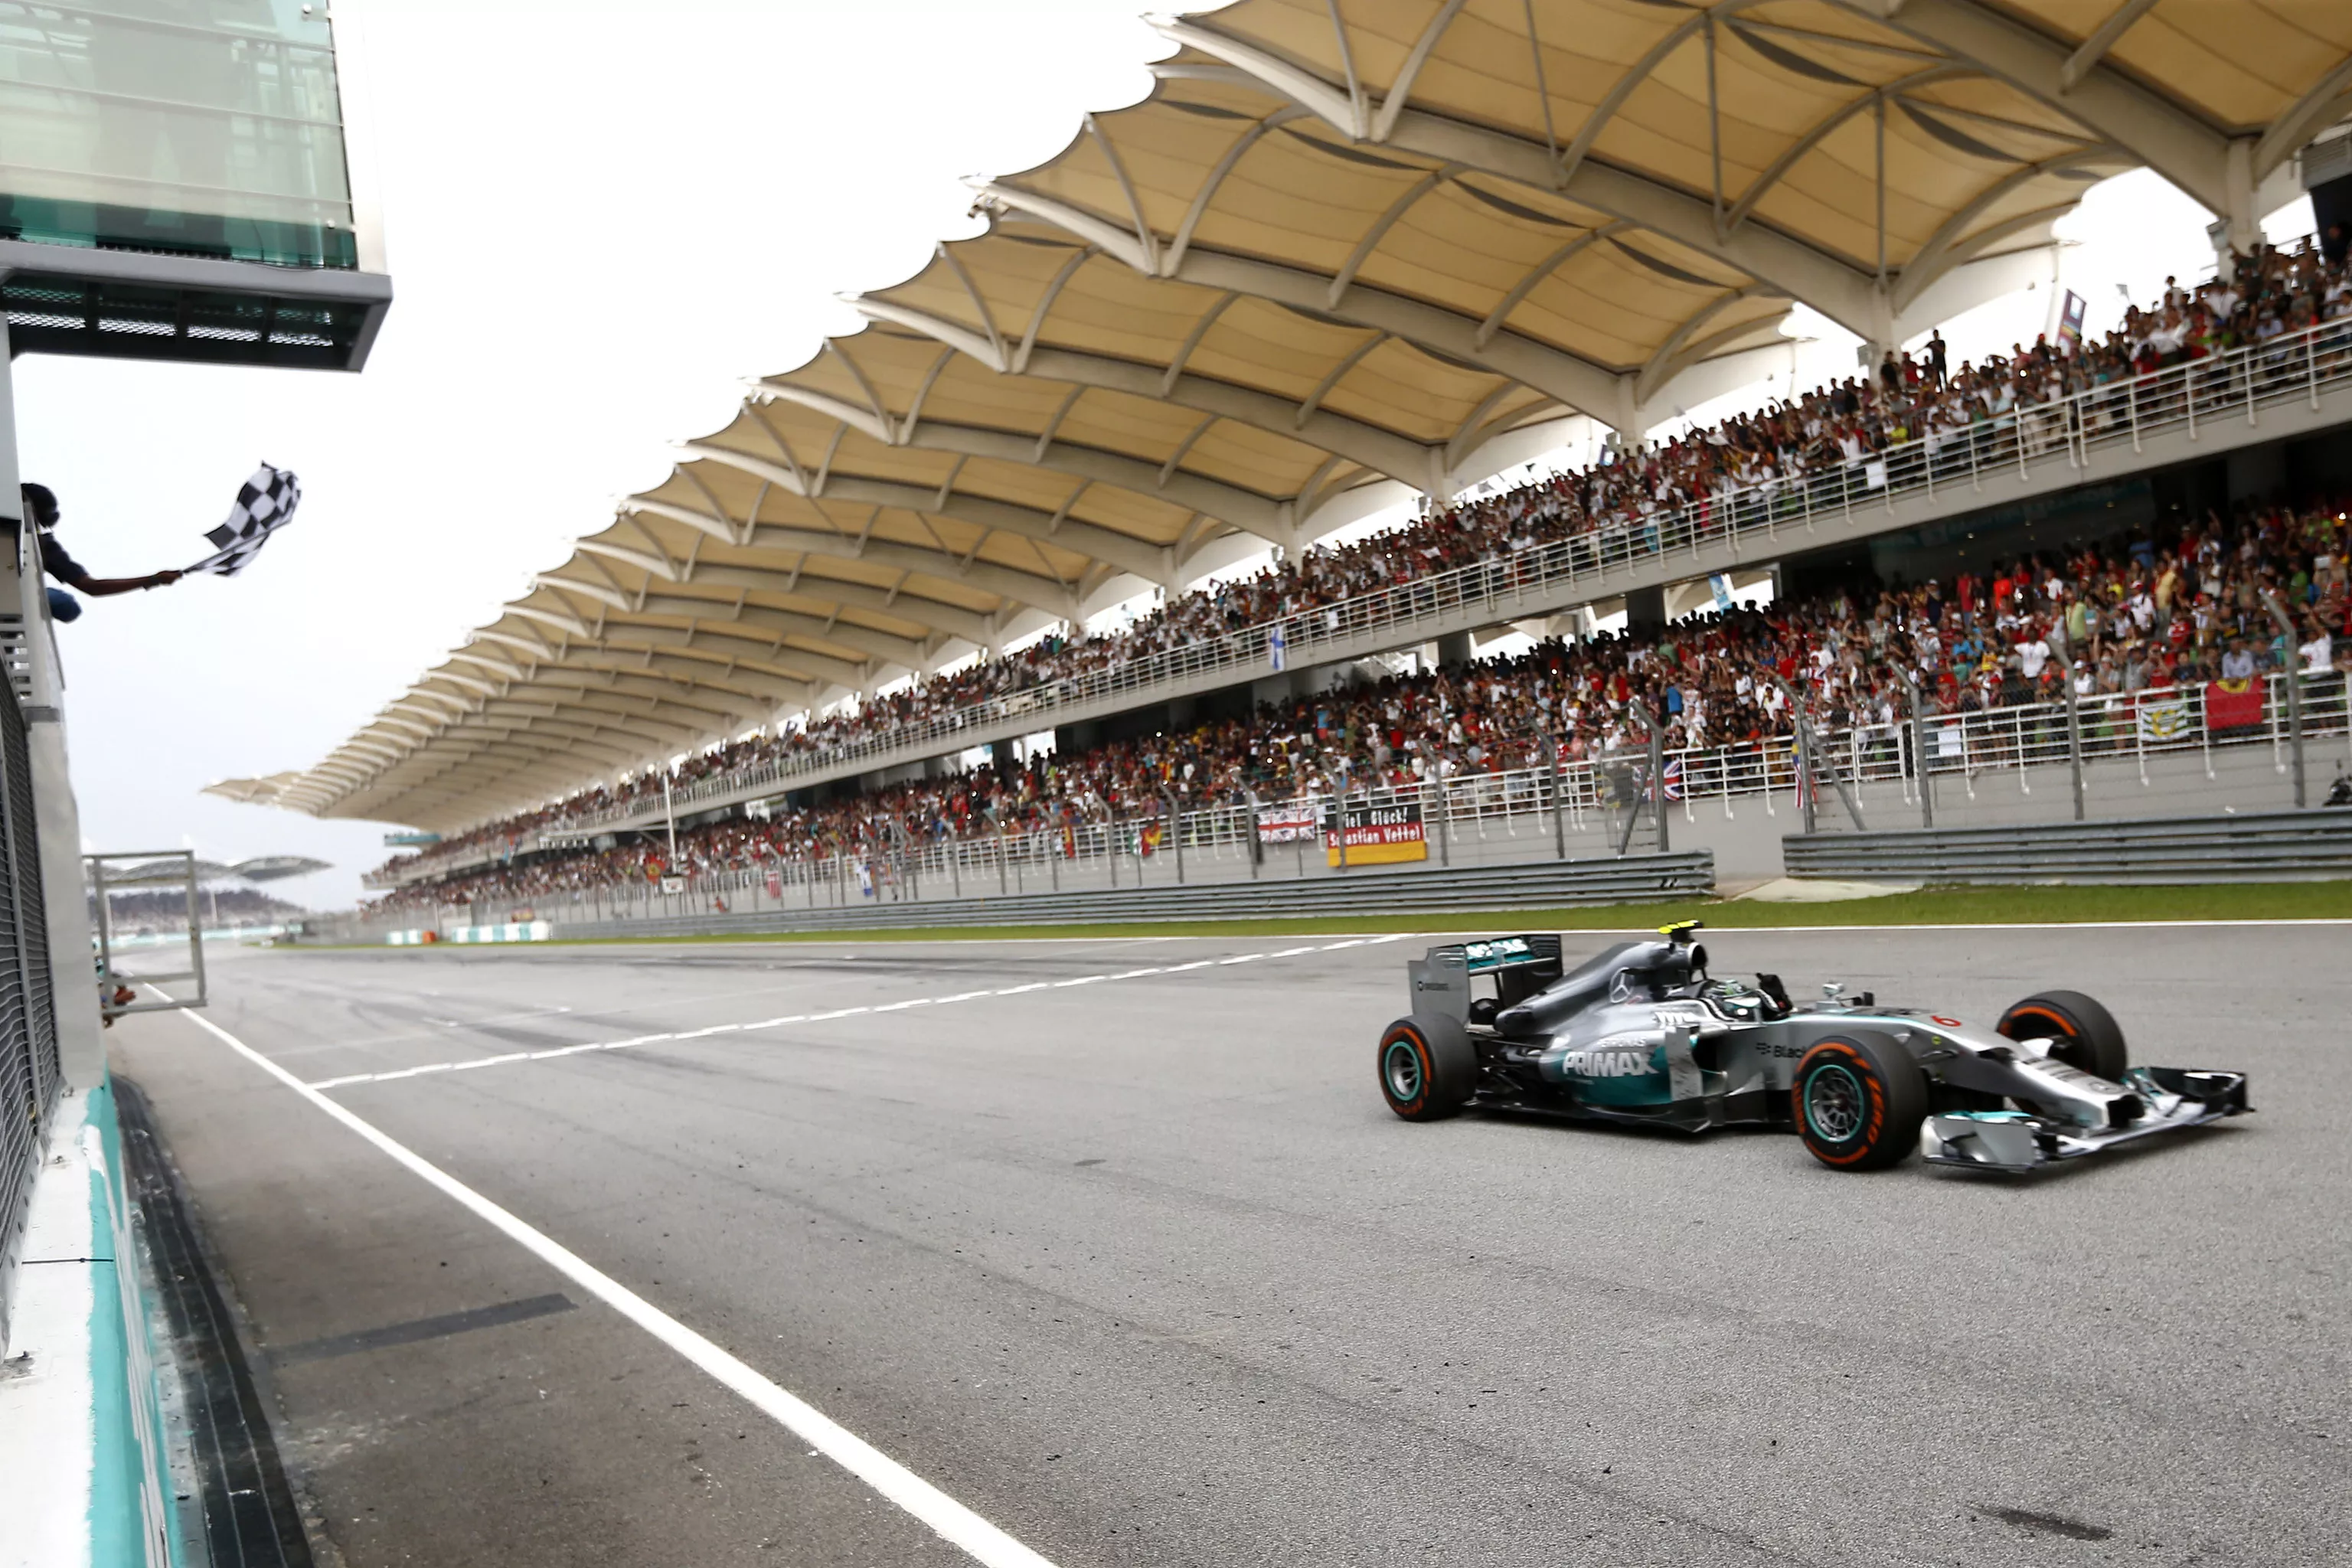 Sepang F1 International Circuit in Malaysia, East Asia | Racing,Motorcycles - Rated 6.9